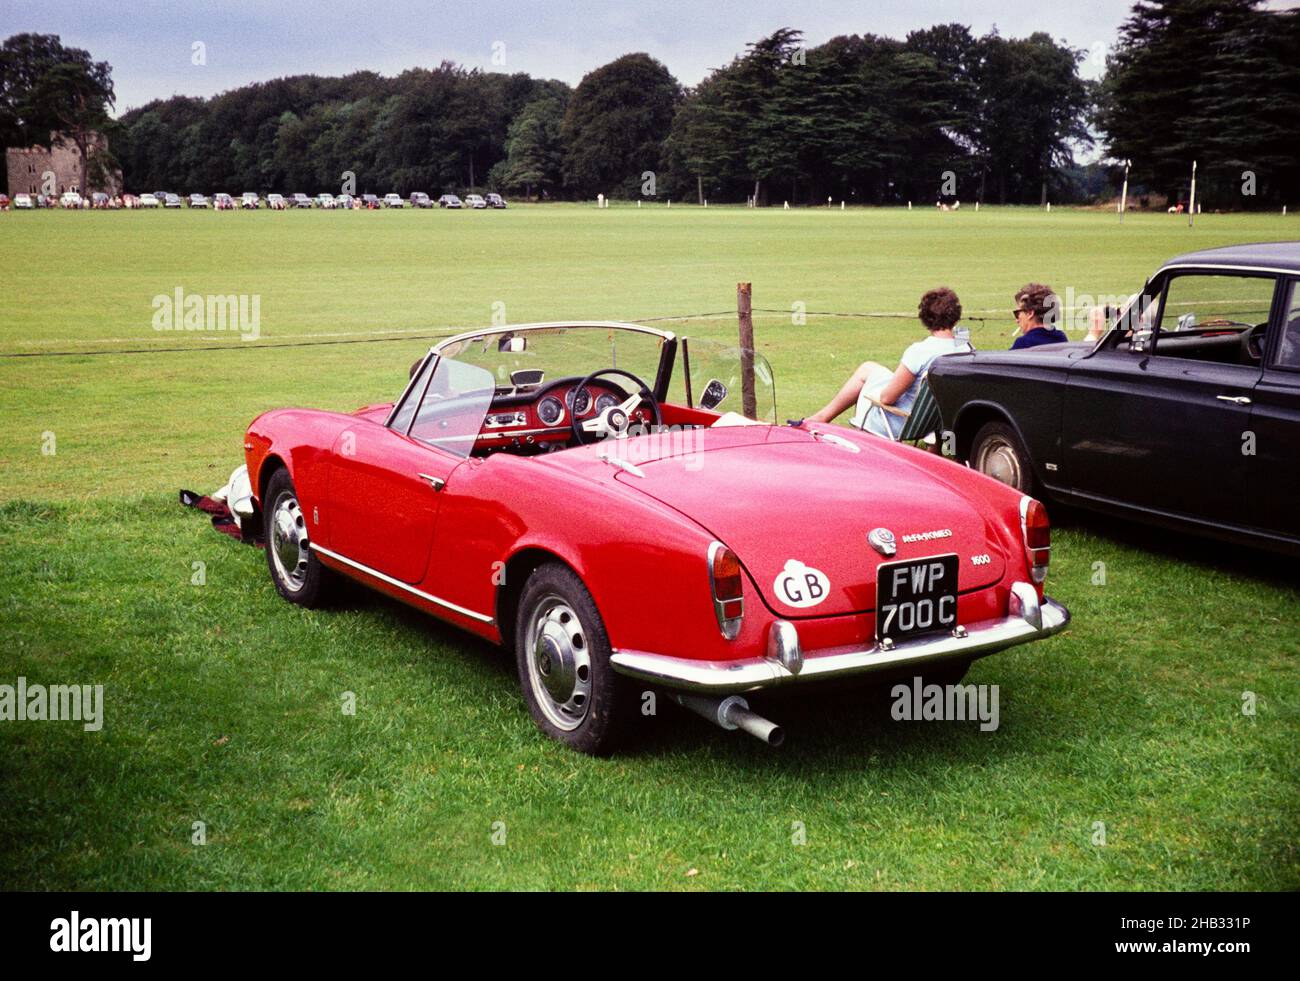 Red Alfa-Romeo Spider 1600 car at a polo match Cirencester, Gloucestershire, England, UK c 1967 Stock Photo